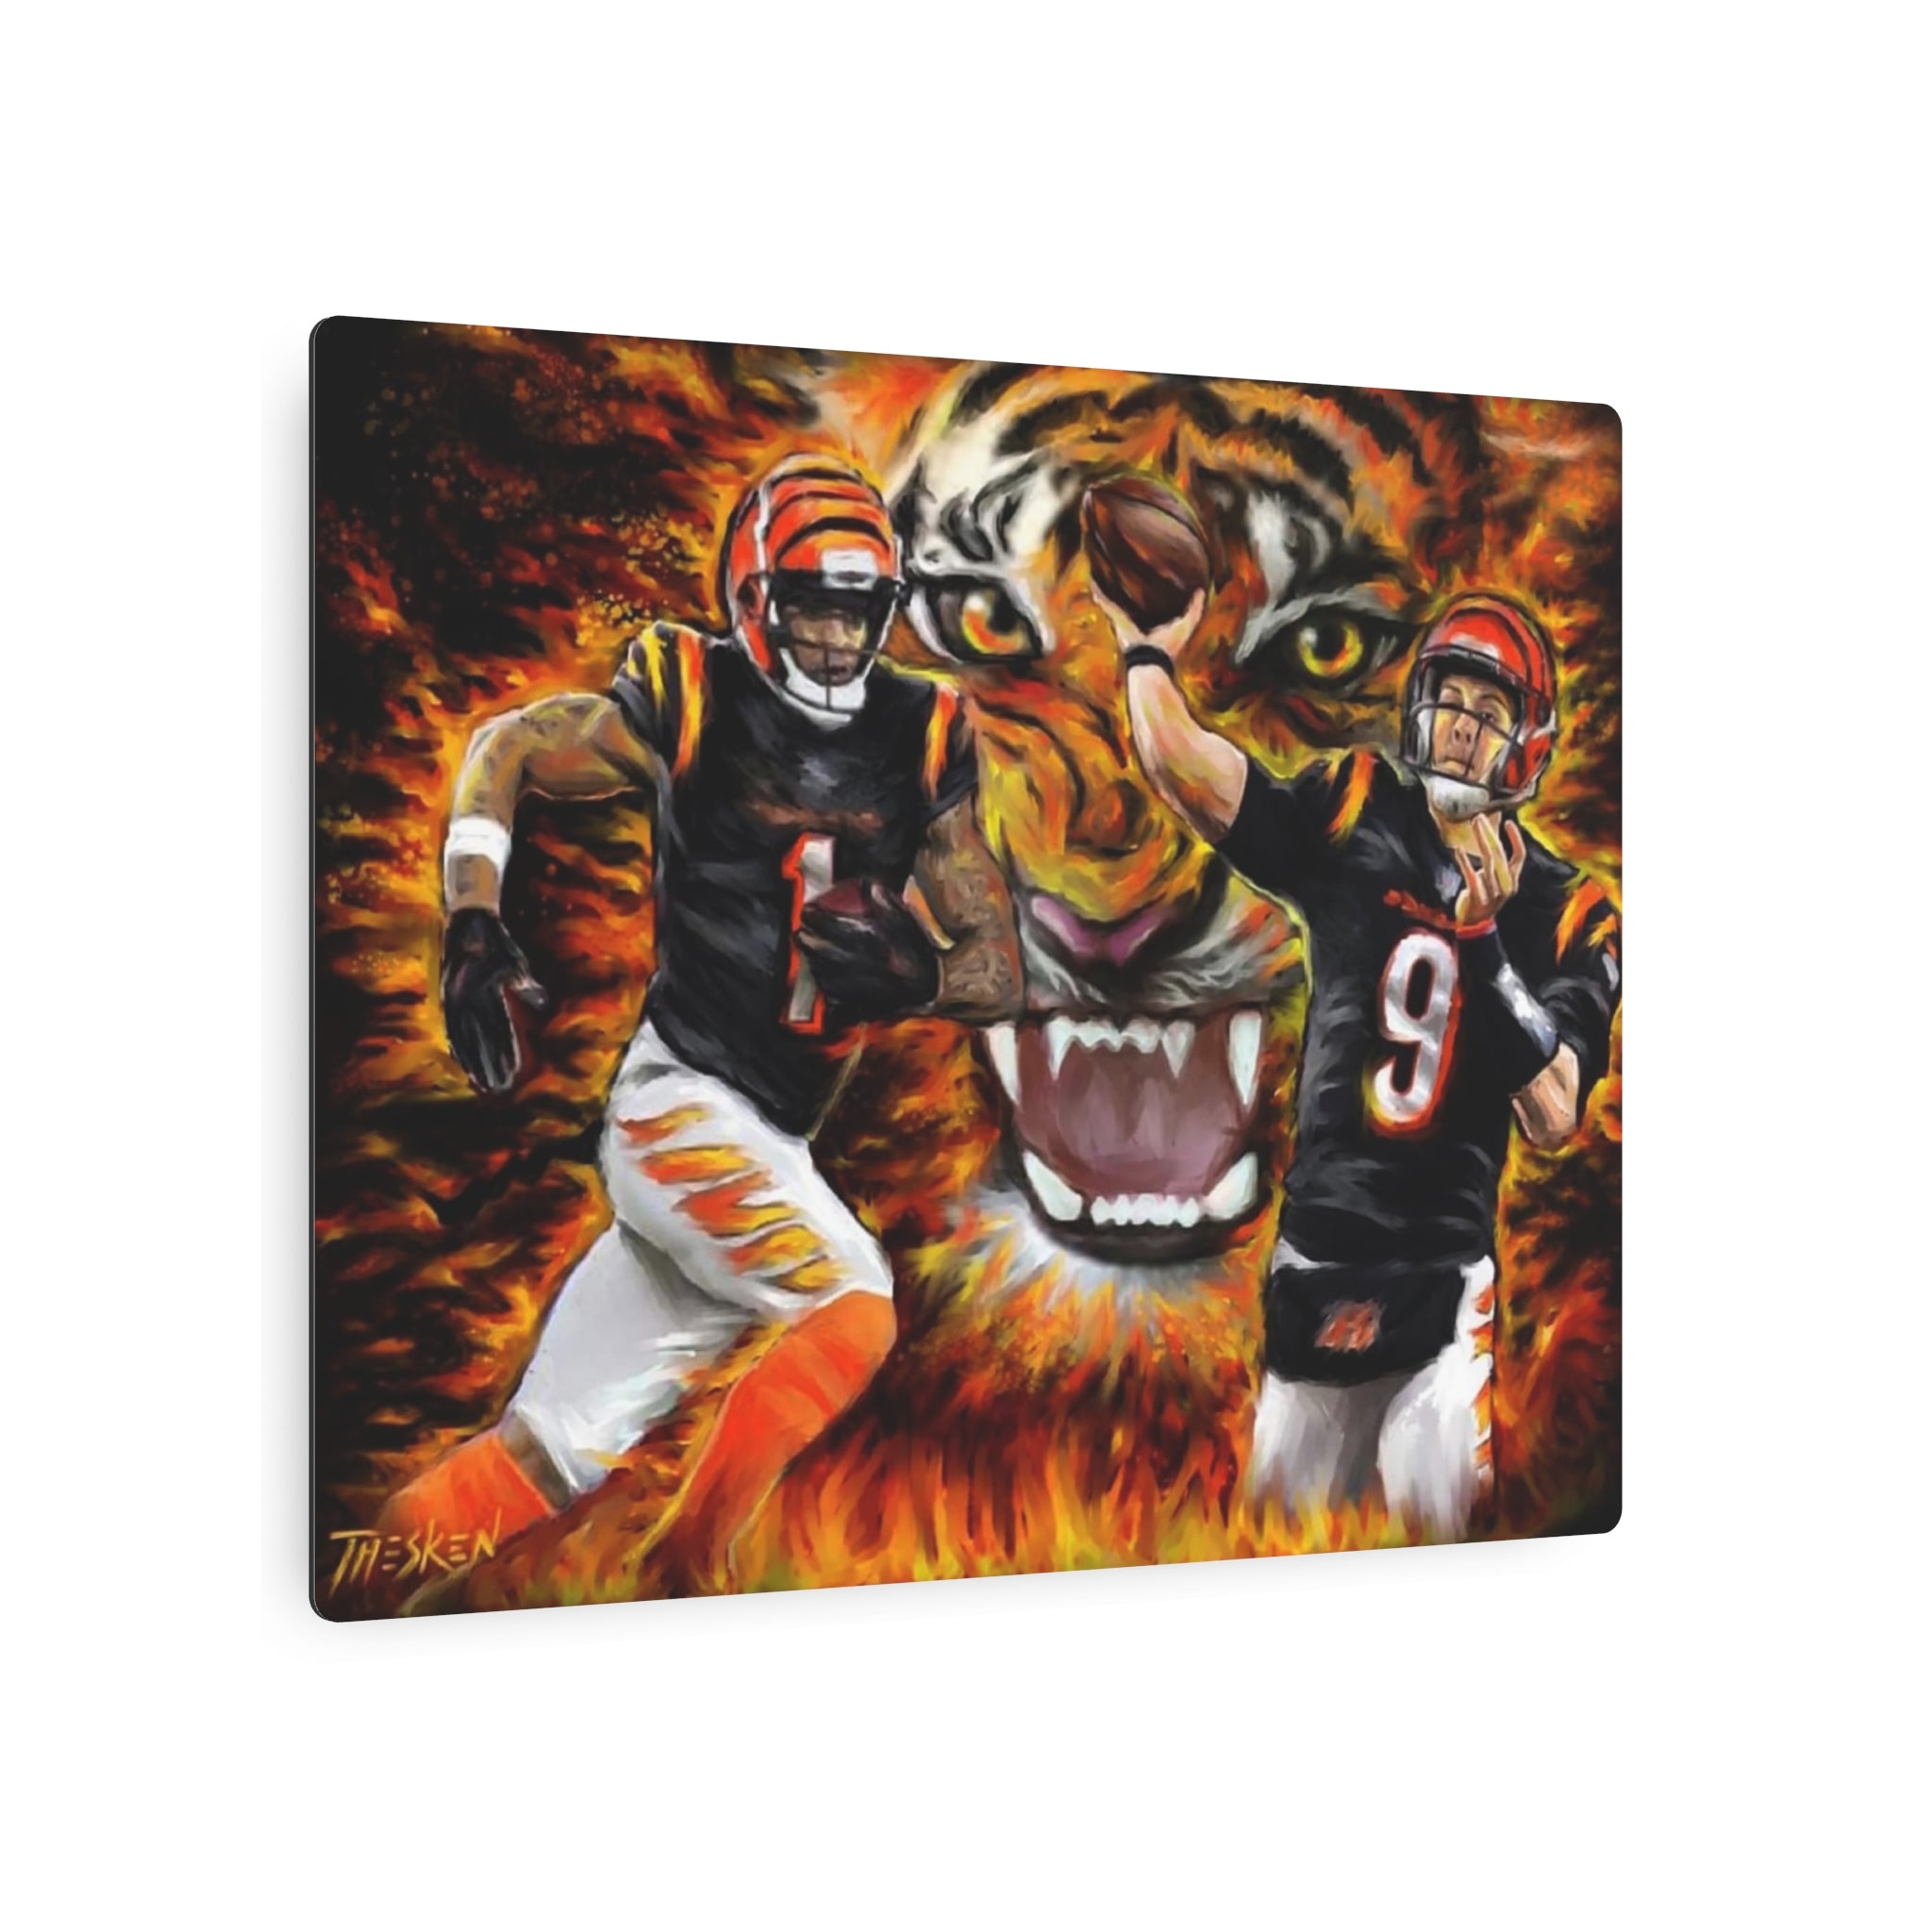 BENGALS FIRE ON BRUSHED ALUMINUM